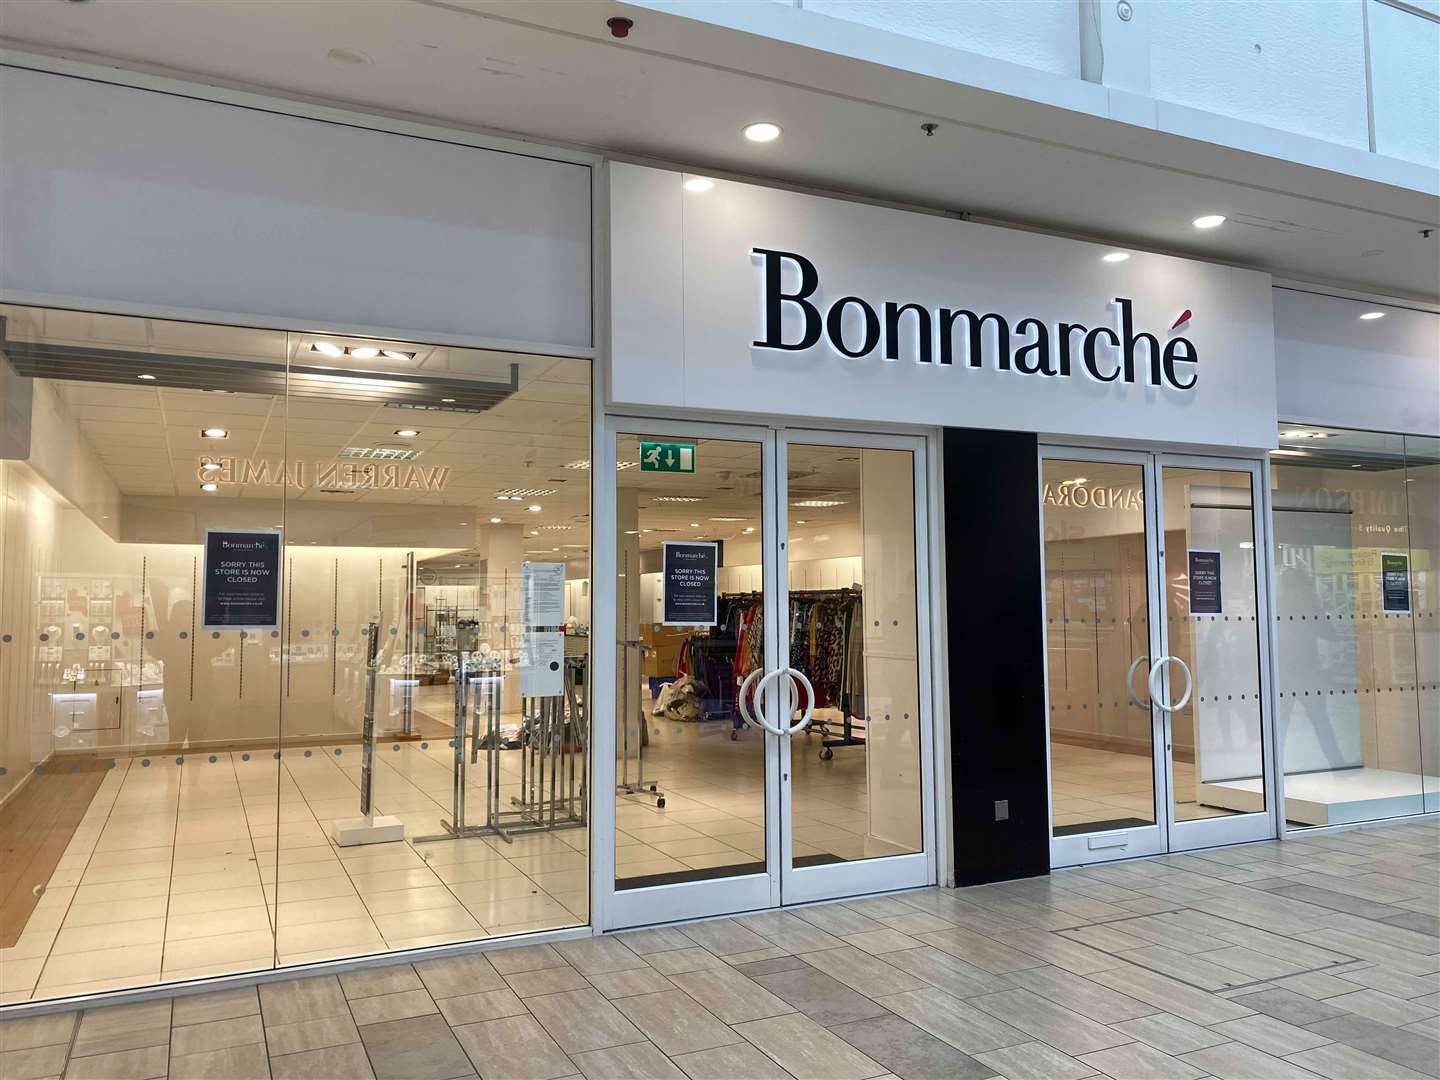 Ashford's Bonmarche store has been emptied after yesterday's closure